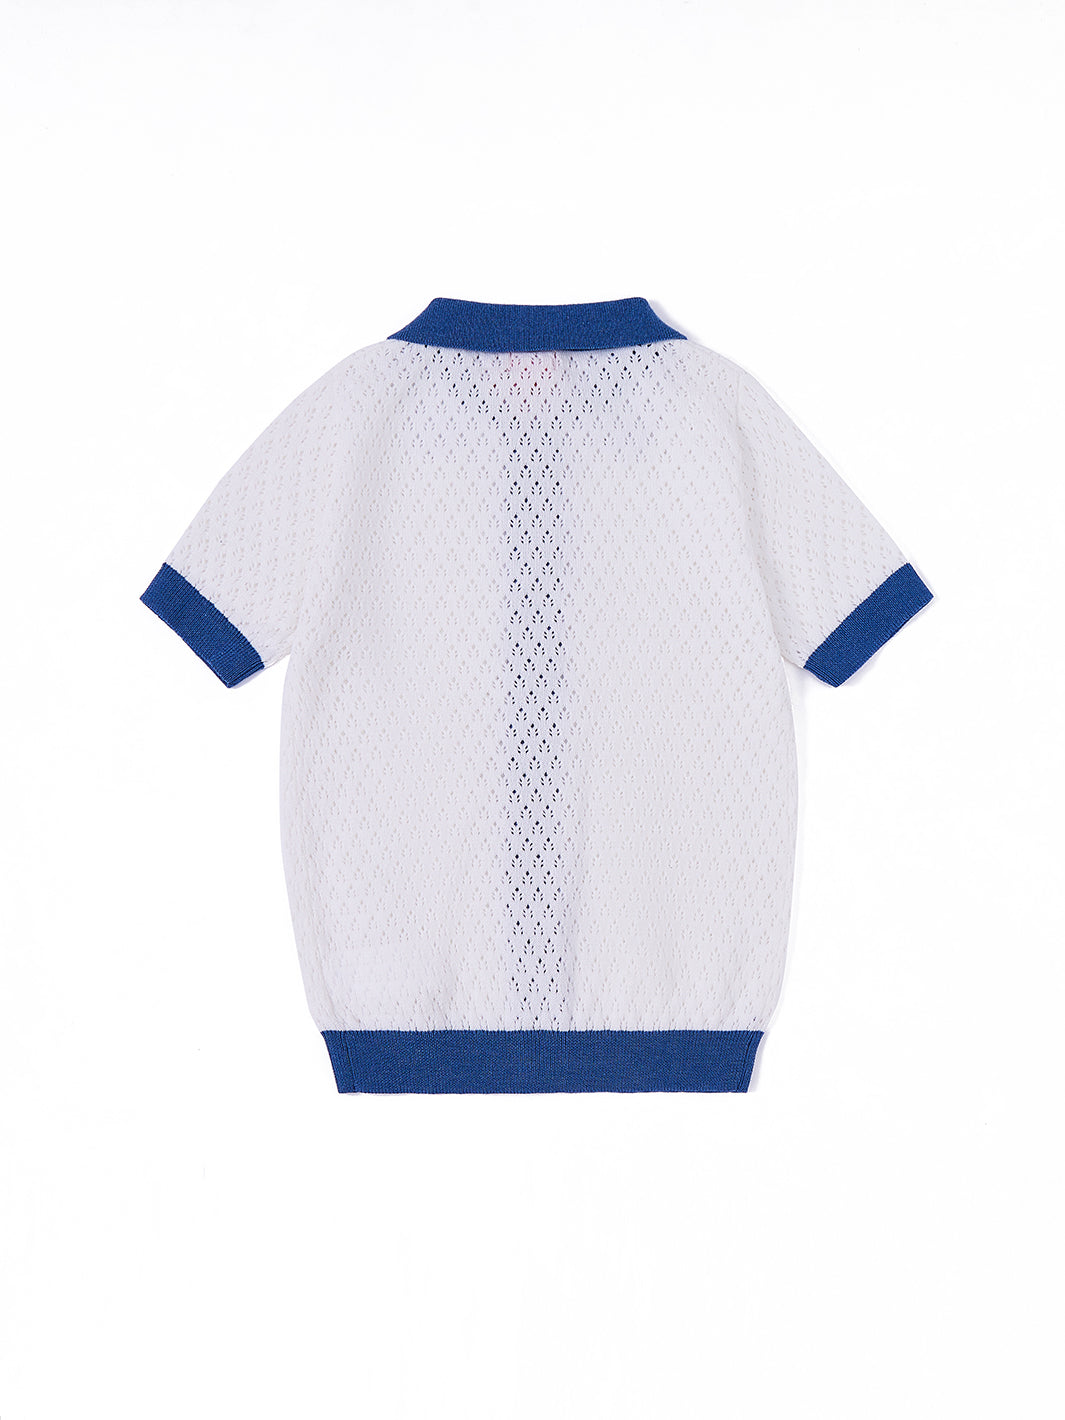 Two Tone Blue Short Sleeve Sweater